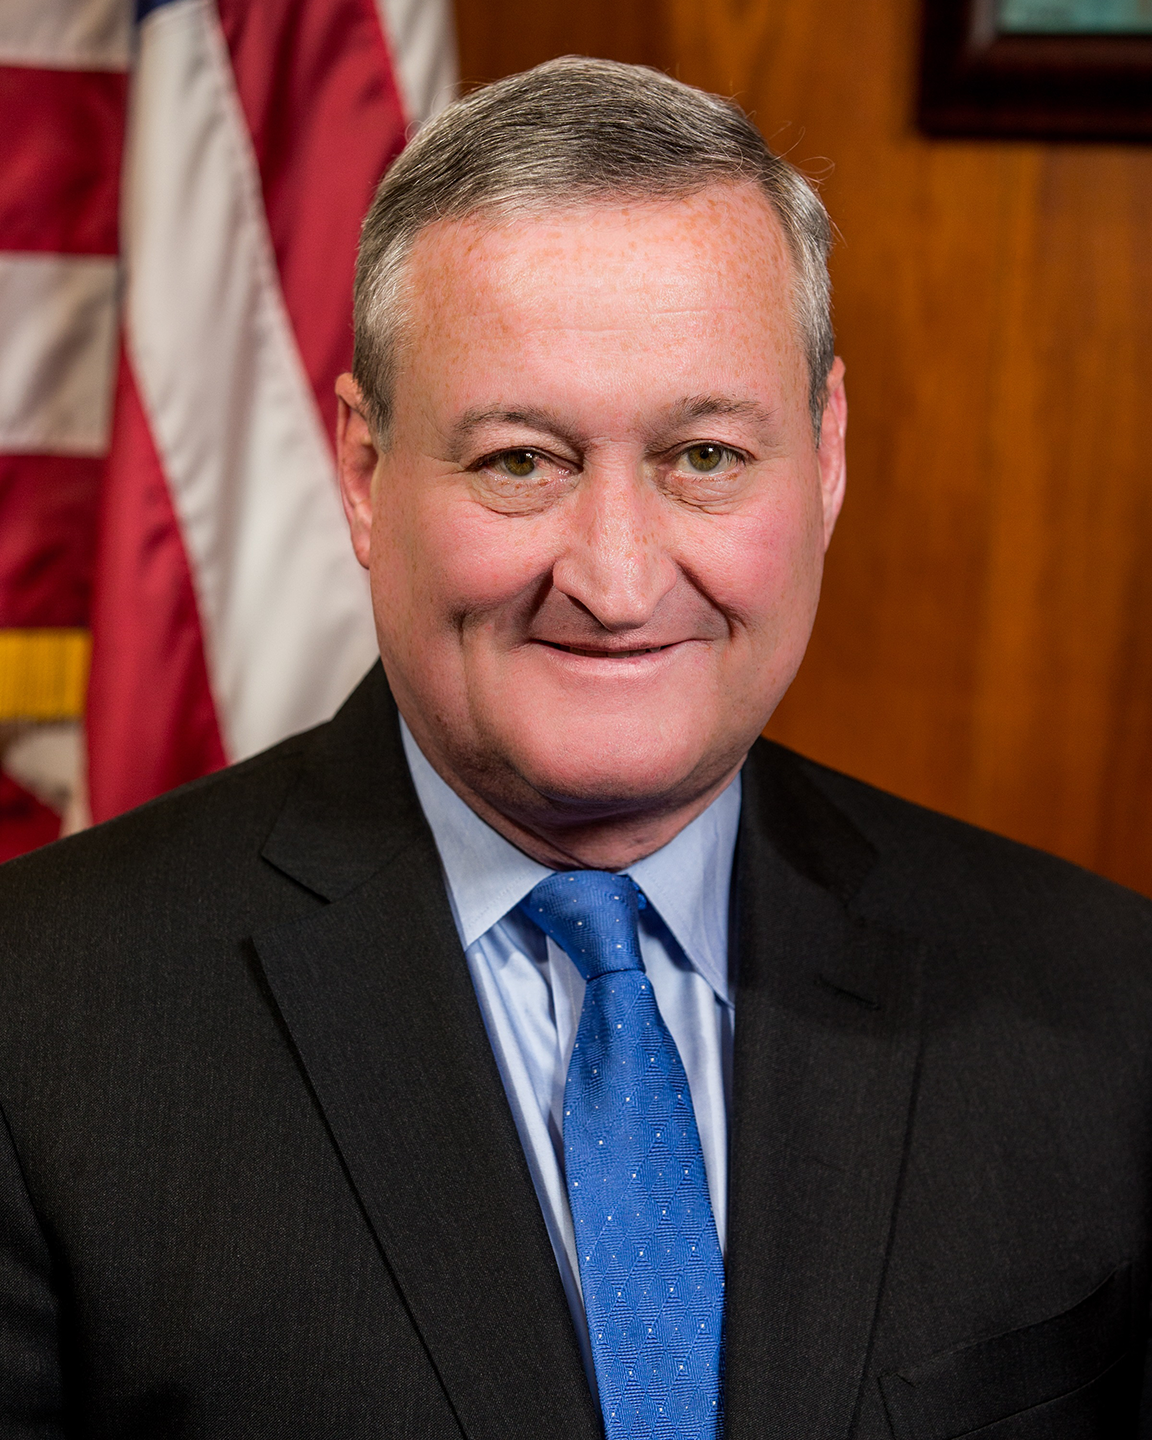 Honorable Jim Kenney